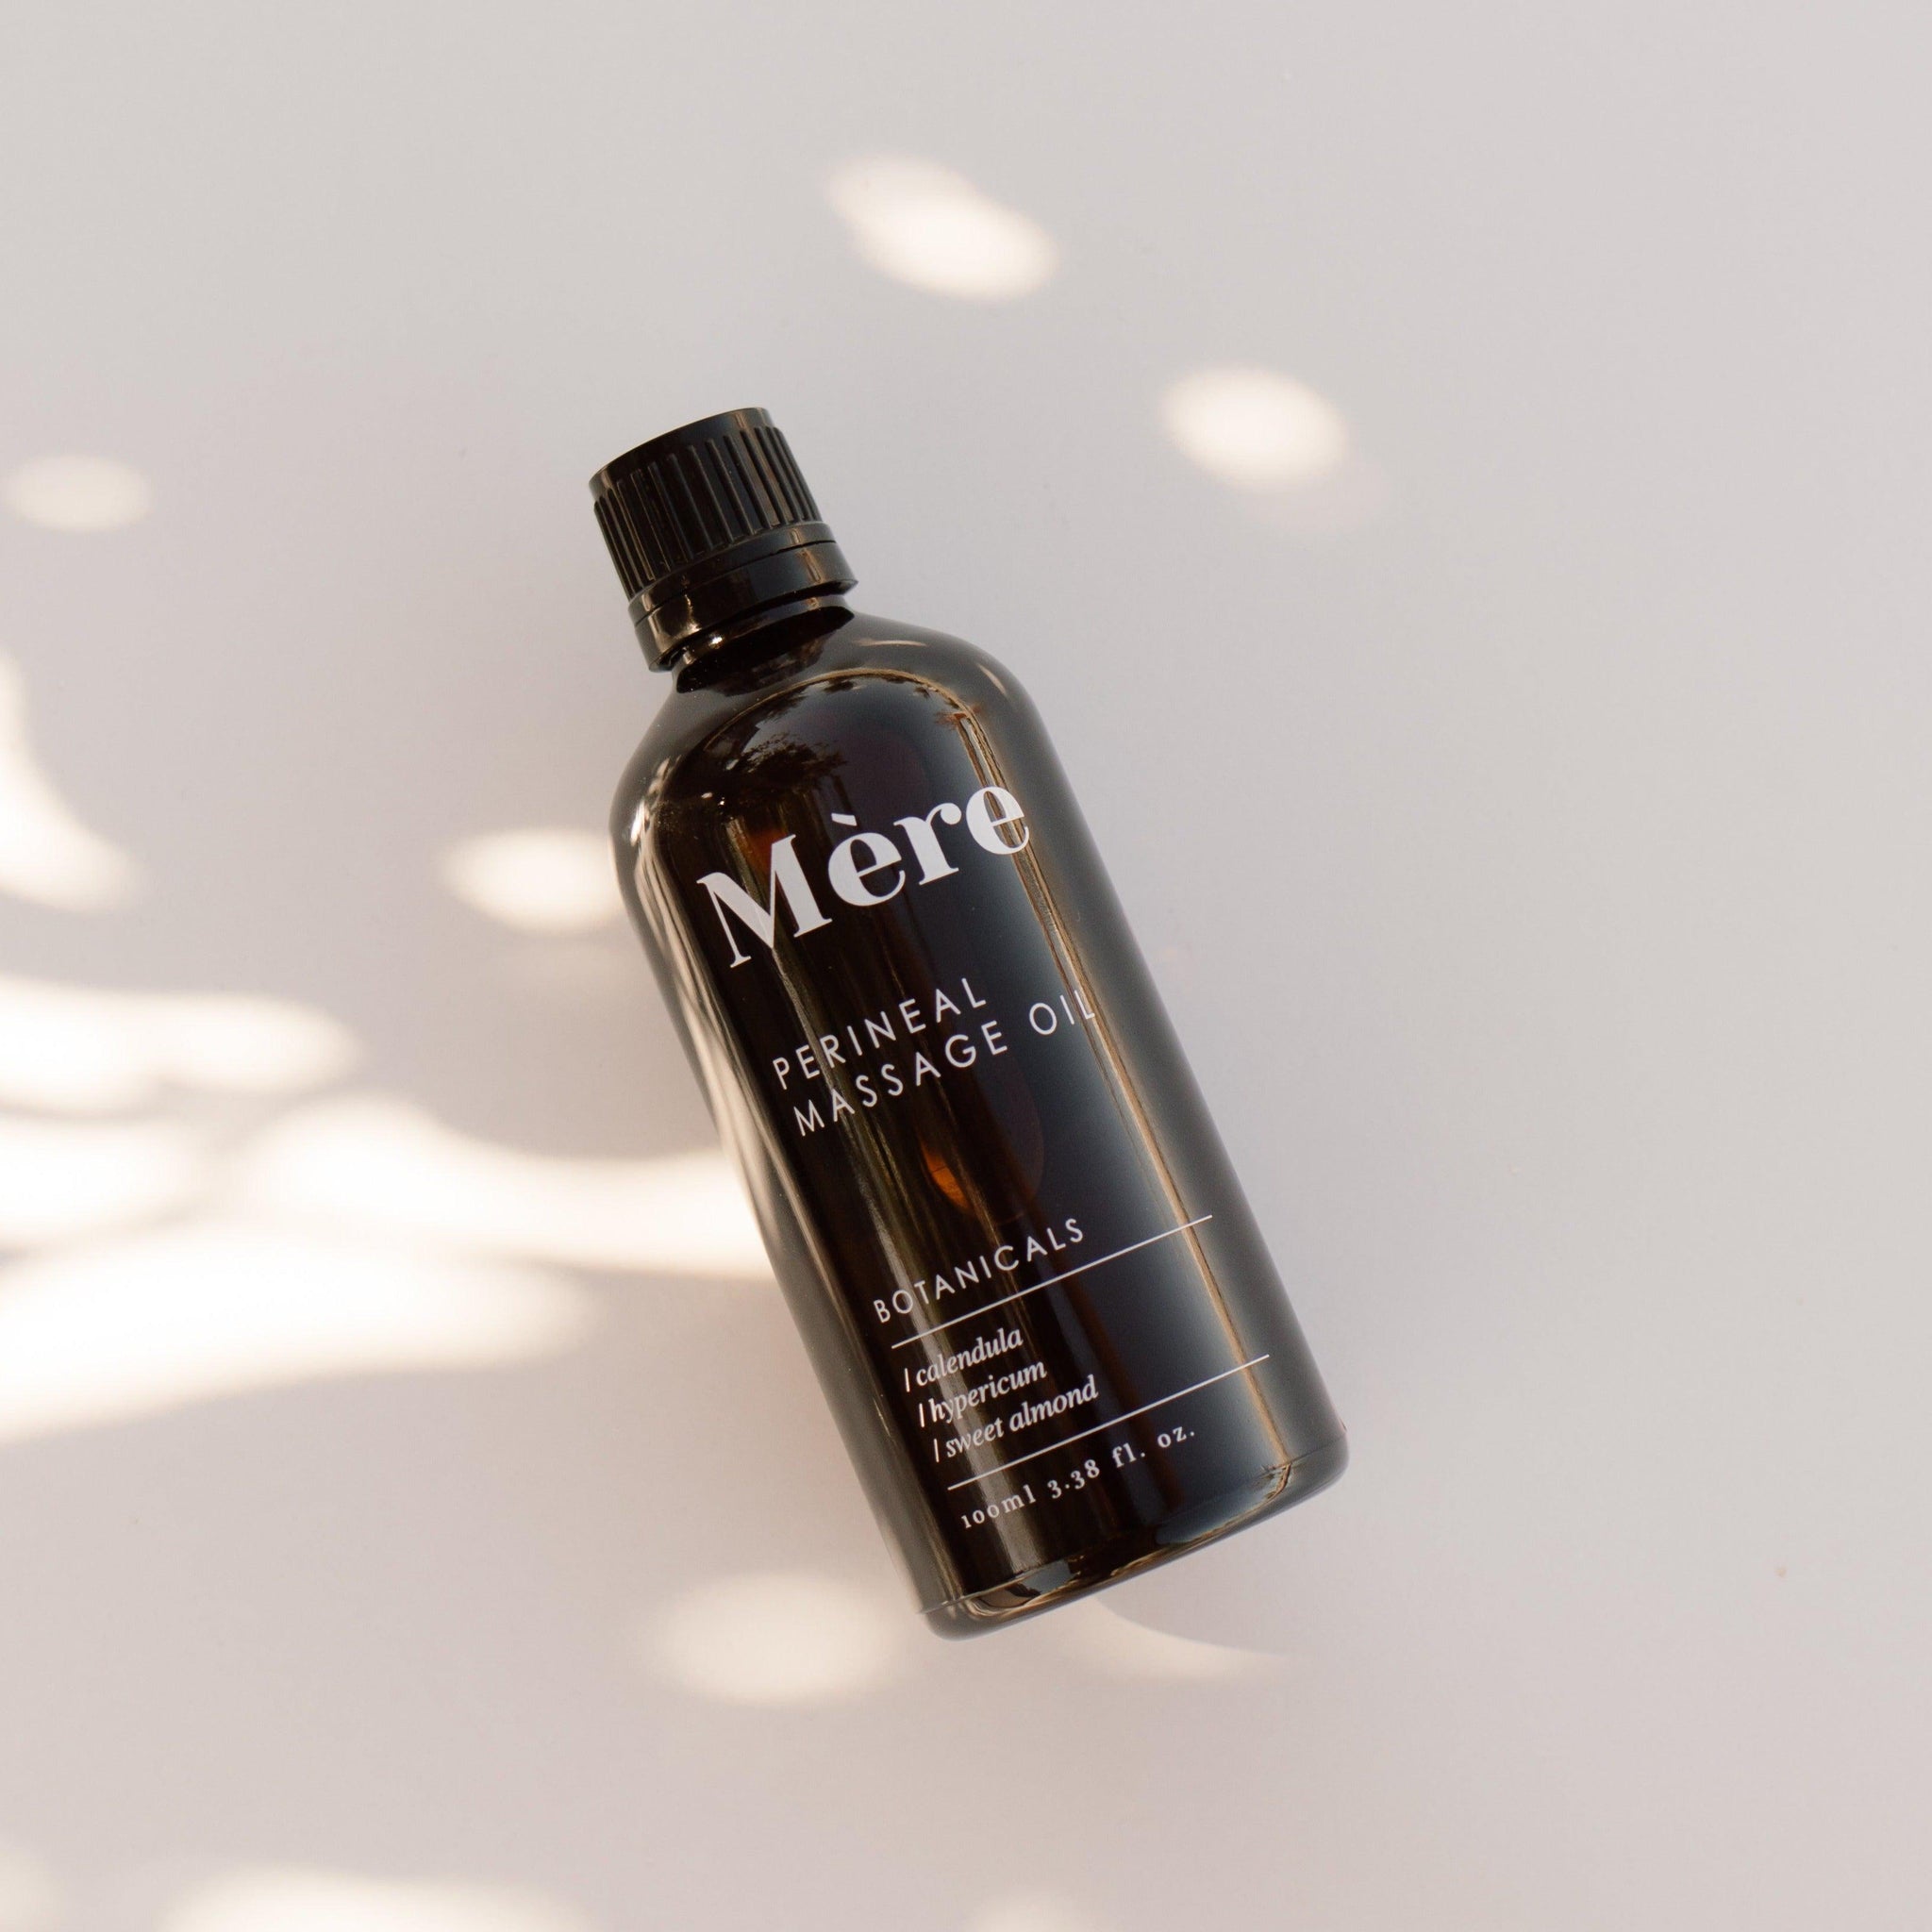 A bottle of Mère Perineal Massage Oil on a white surface.